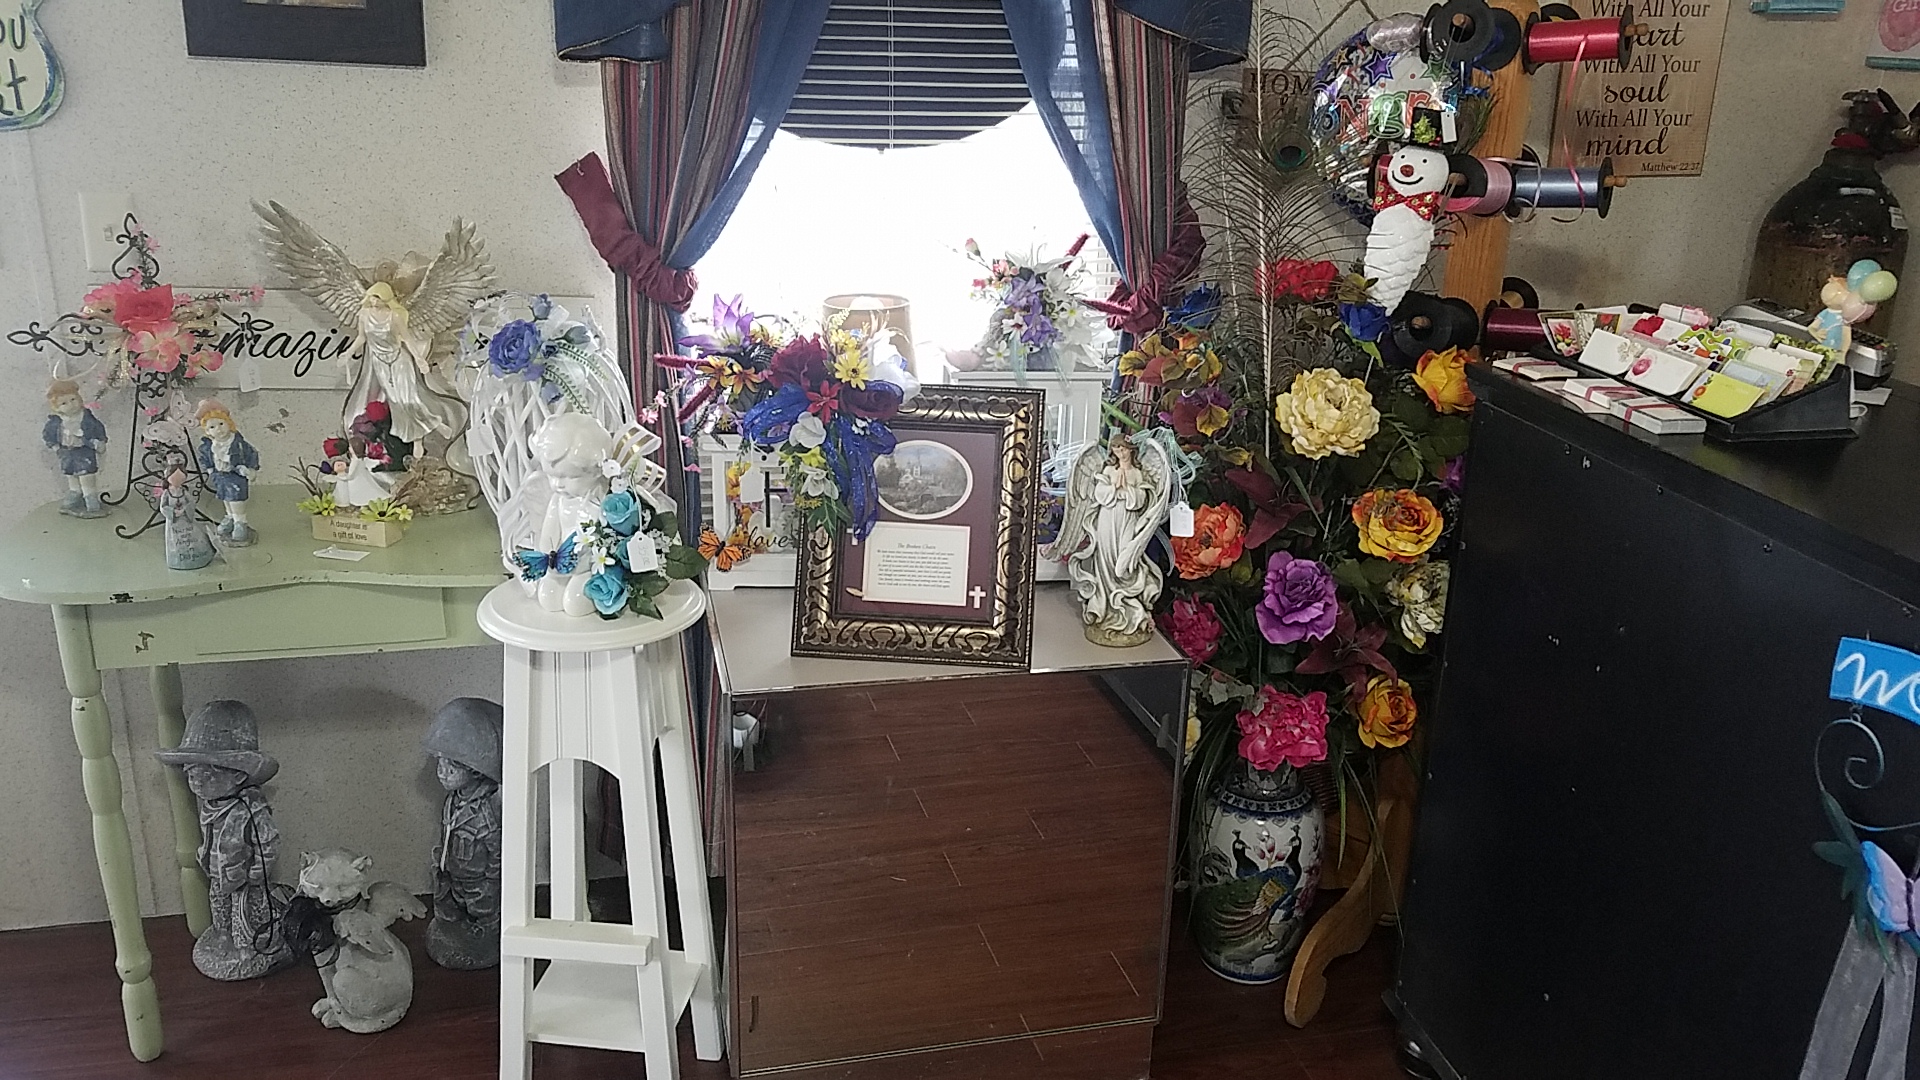 Gifts From the Heart Florist 220 Monument Rd, Summertown Tennessee 38483